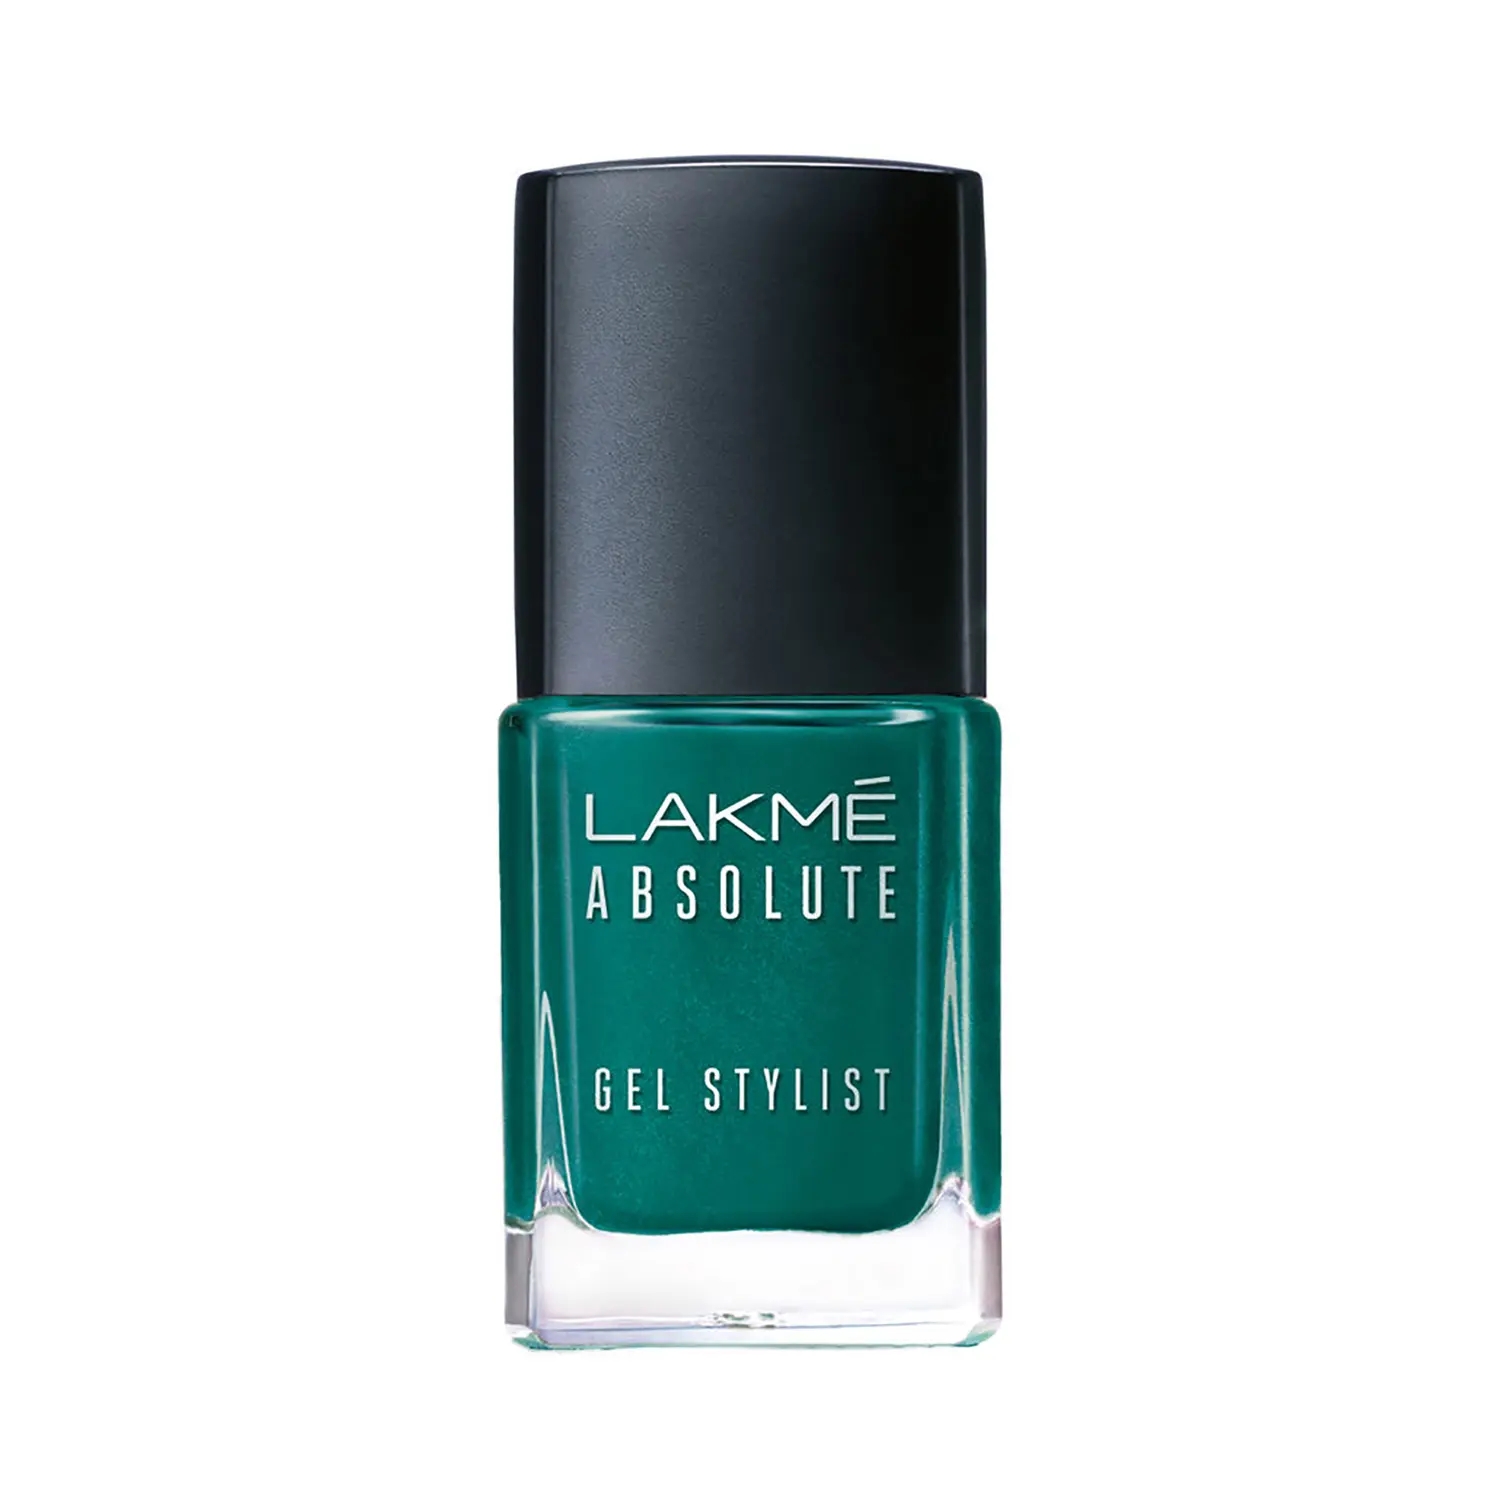 Lakme | Lakme Absolute Gel Stylist Nail Color - Grassroots (12ml)